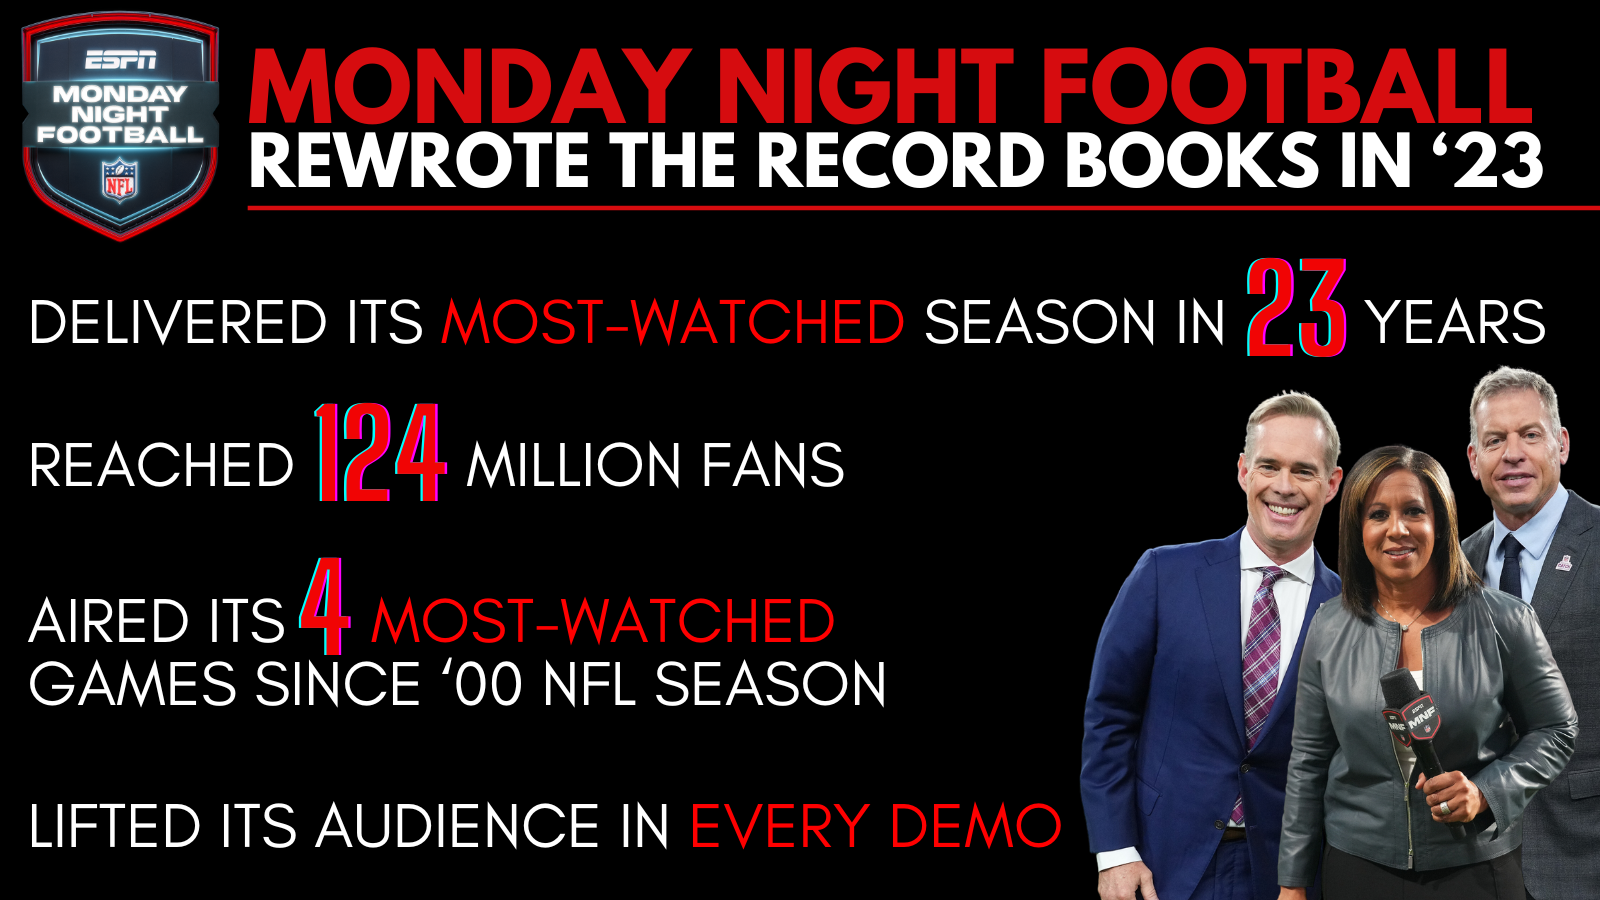 "Monday Night Football" Achieves Its Best Viewership Since 2000 Reaching Over 124 Million Fans